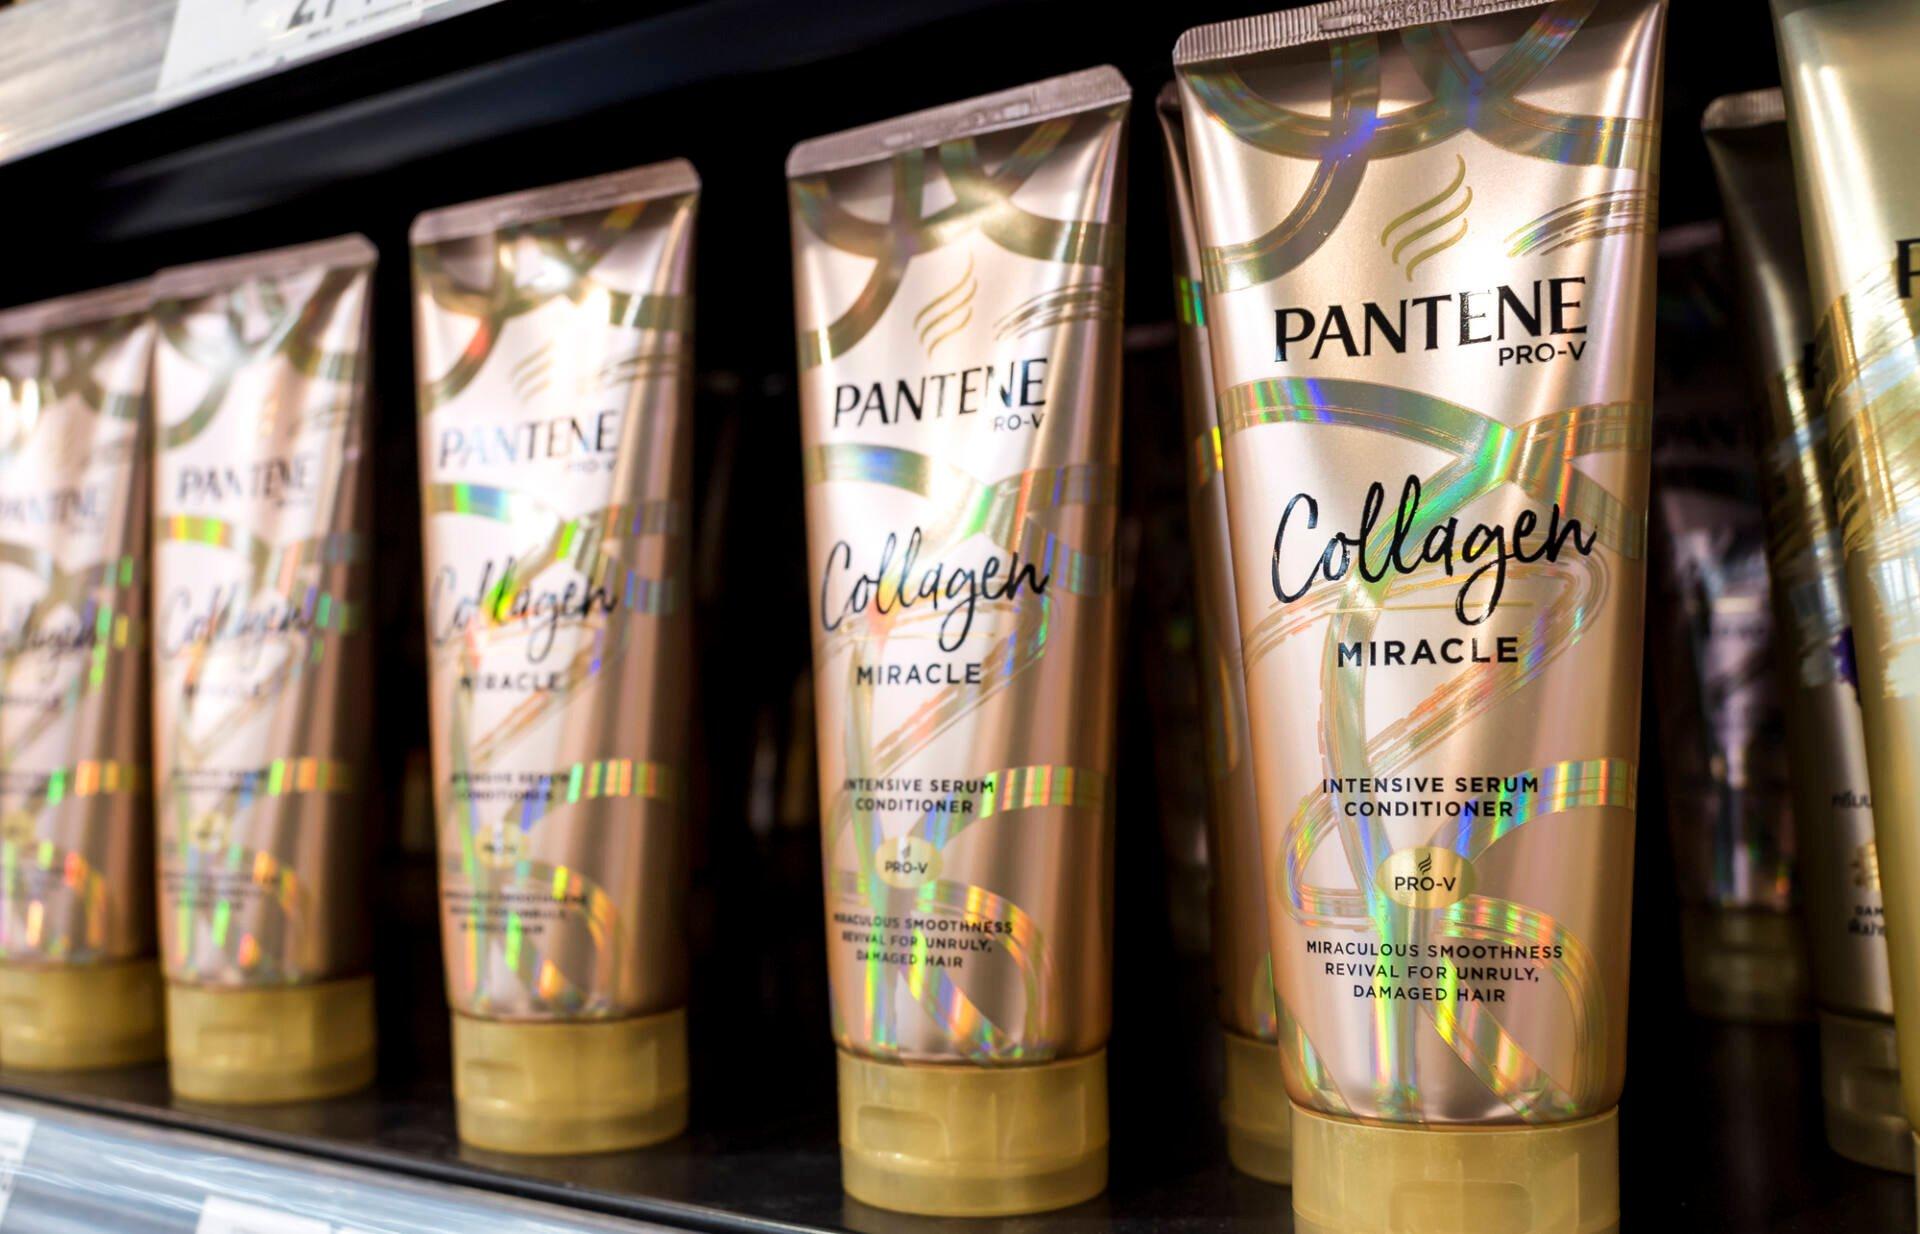 A shelf of Pantene haircare products in a beauty store